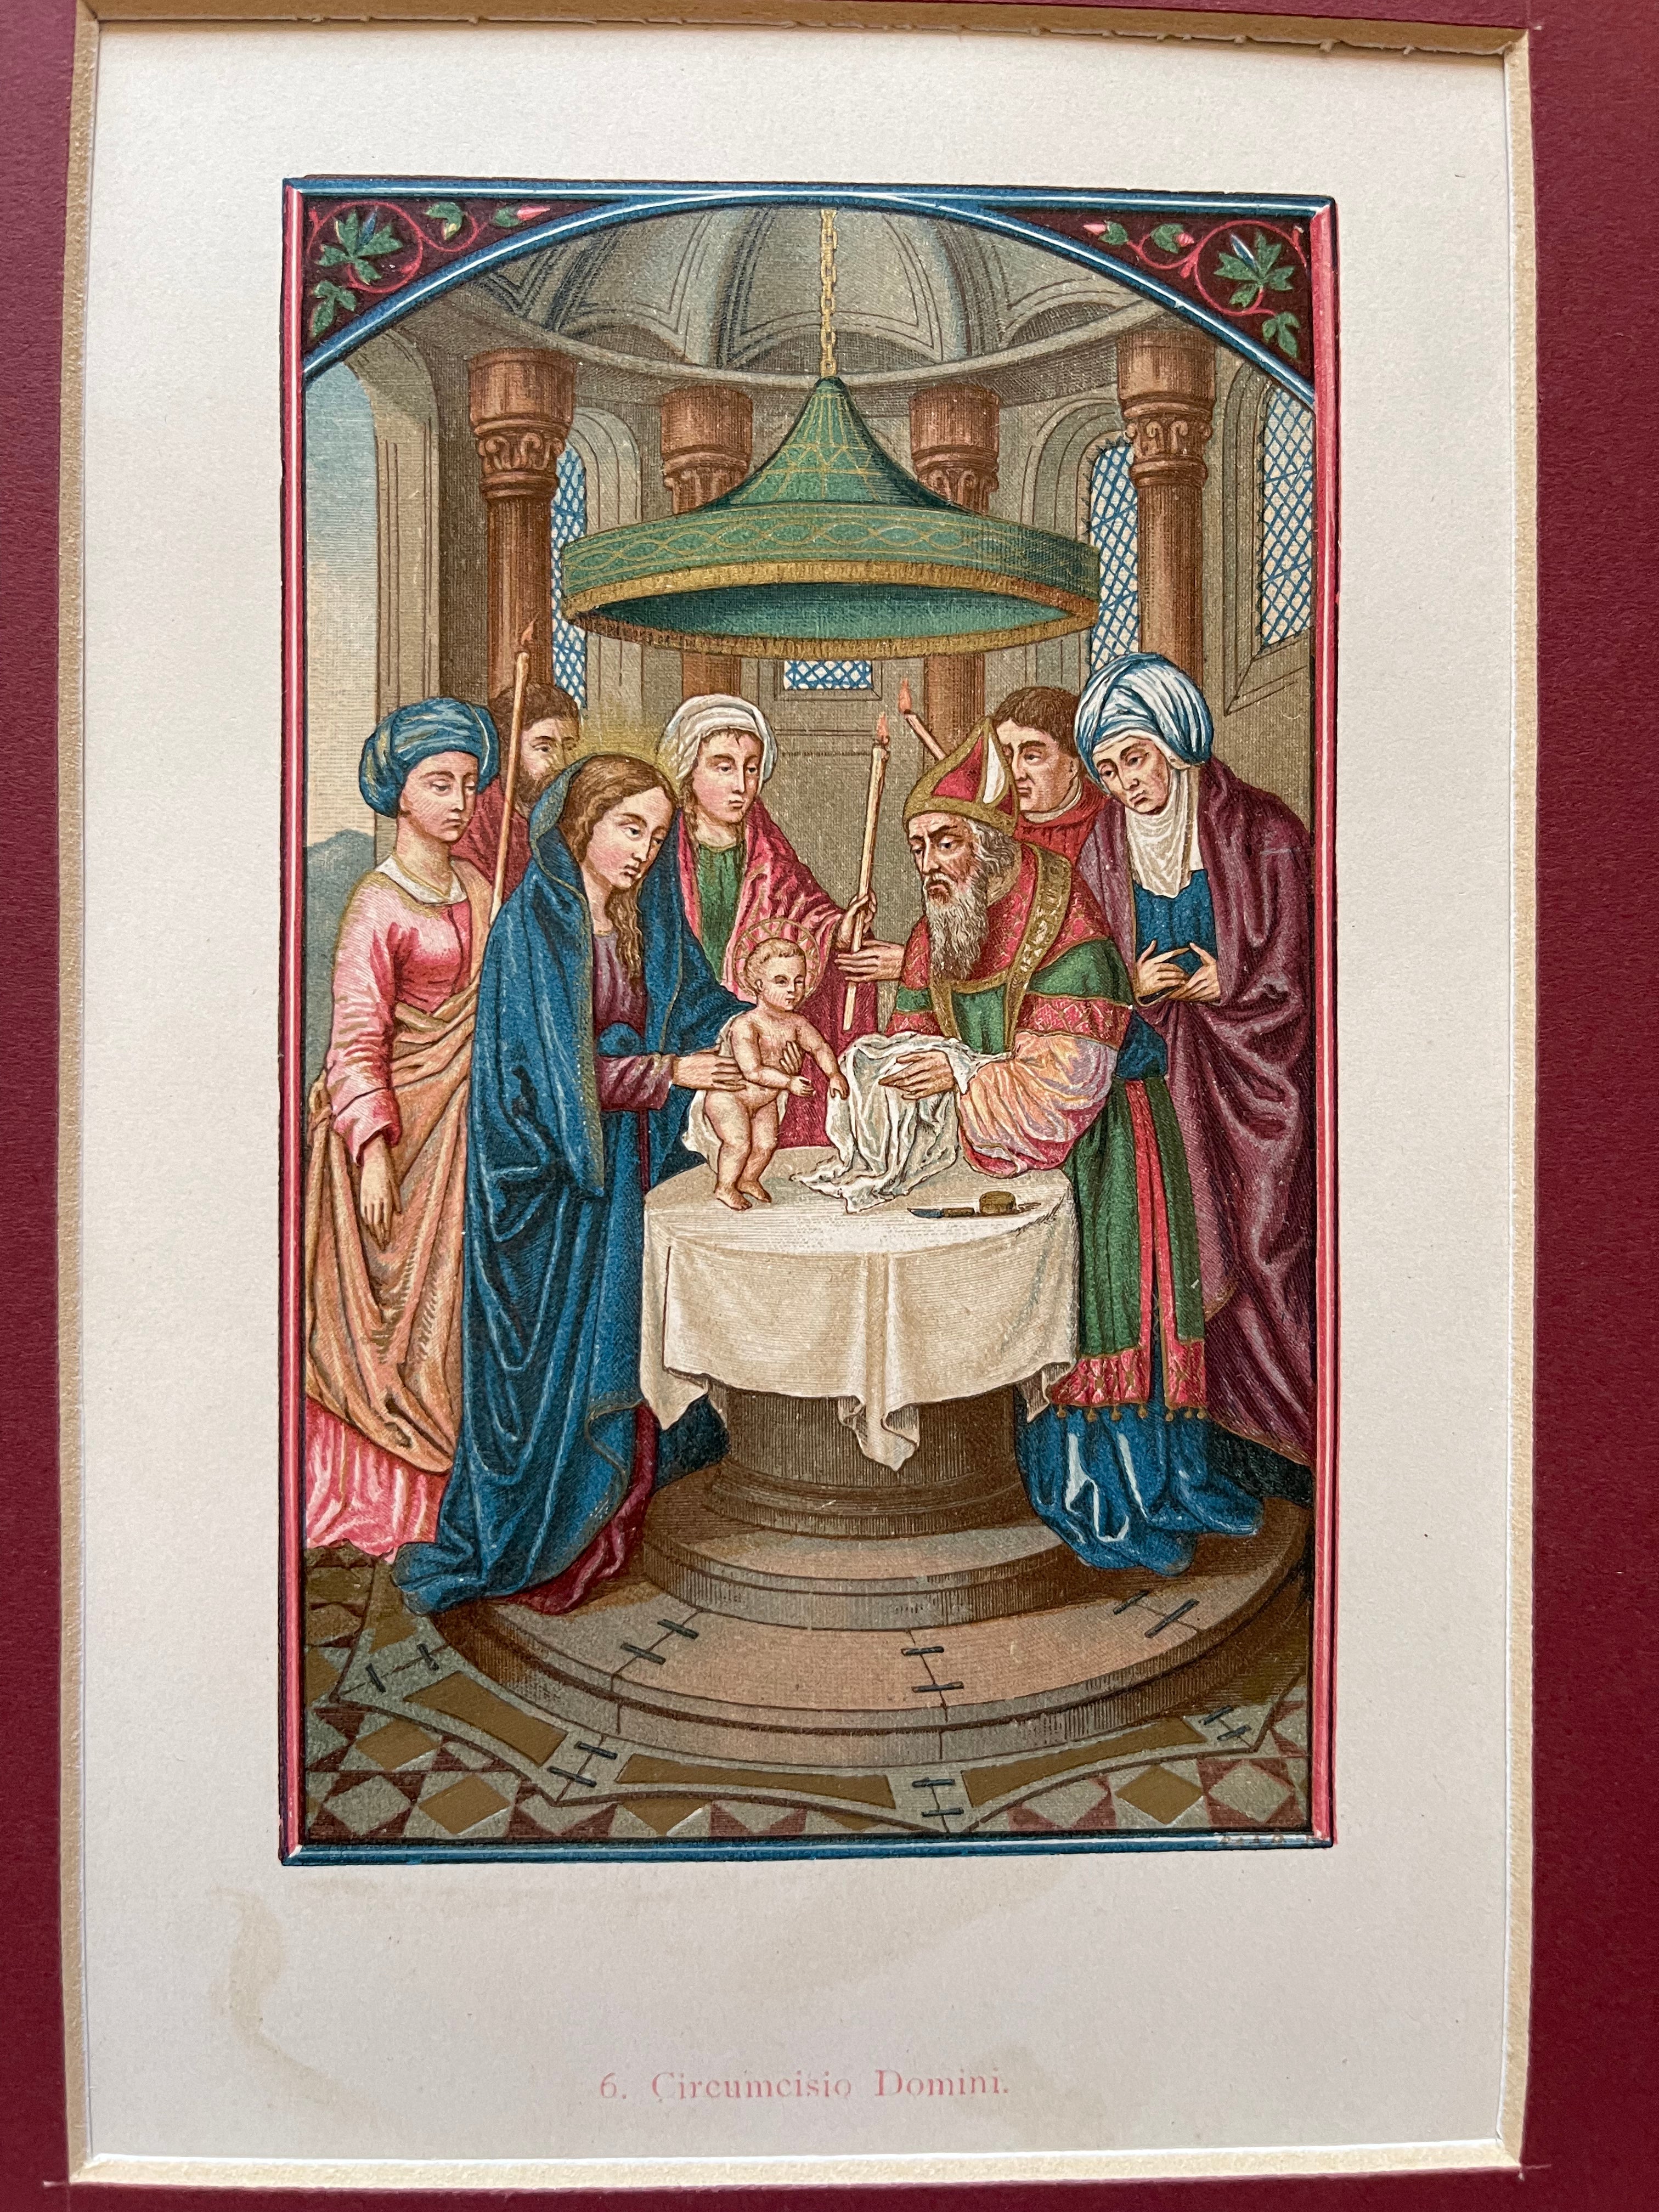 Antique Gilt Viennese Print | Circumcision / Presentation of the Lord